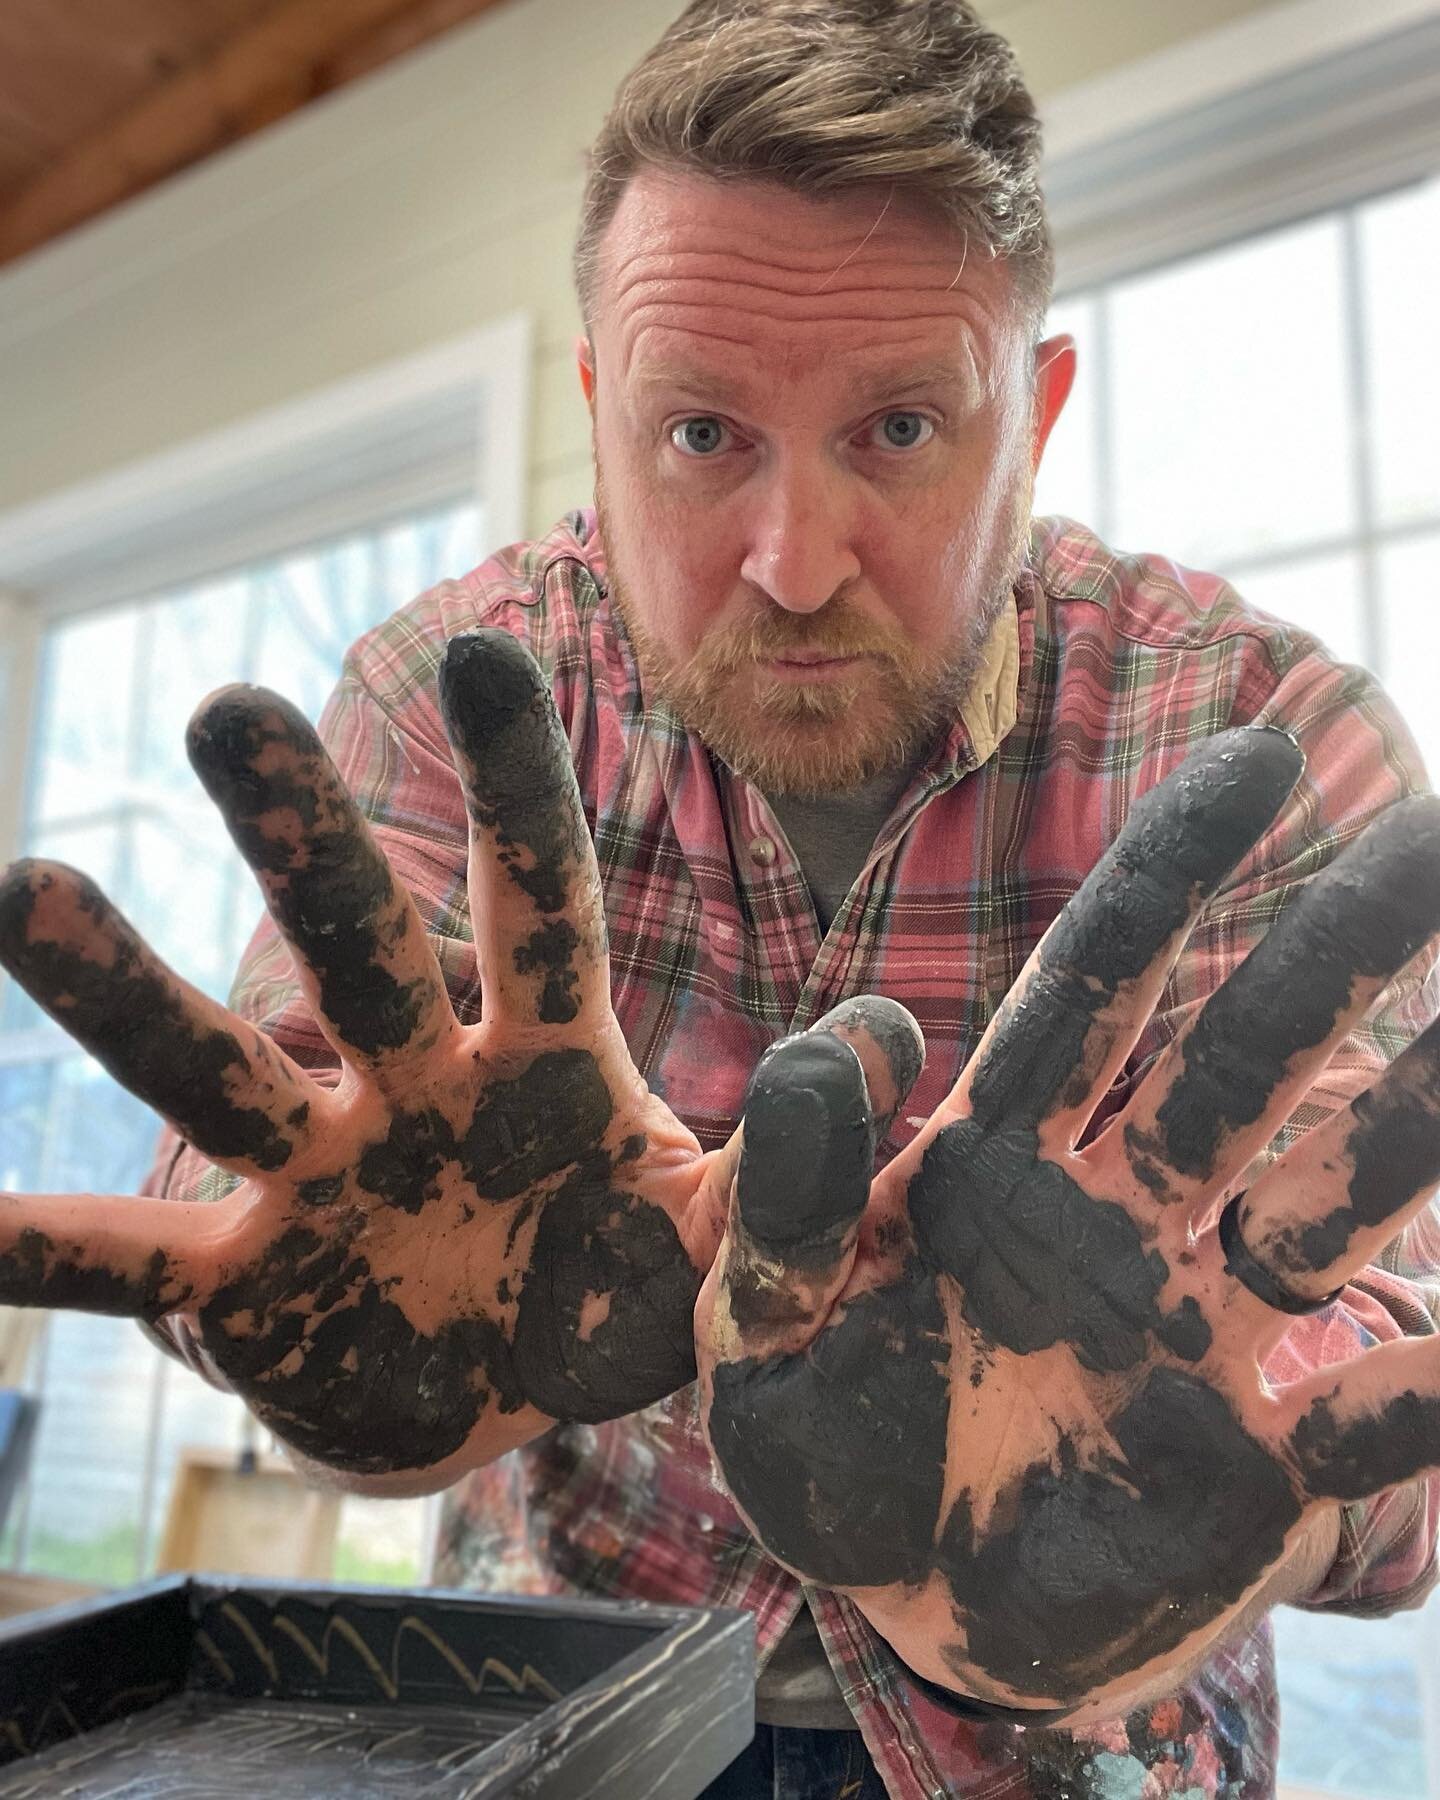 Sometimes life is&hellip;a bit much. May as well get your hands dirty and make something. 

#makemessestellstories #contemporyart #artcollectors #interiordesign #originalartwork #modernpainting #contemporaryartist